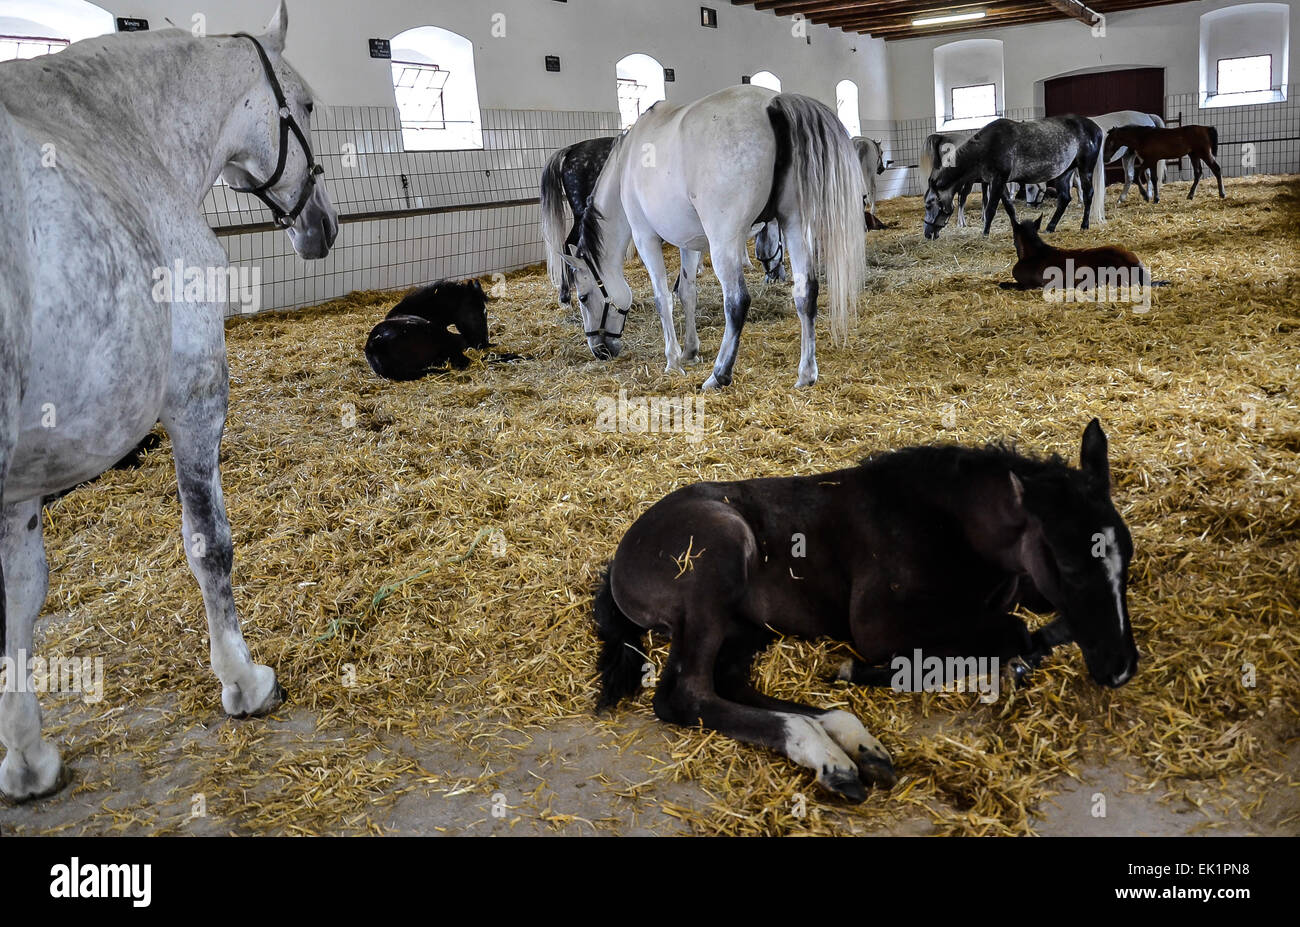 federal stud world famous Lipizzaners Mares and foals Stock Photo